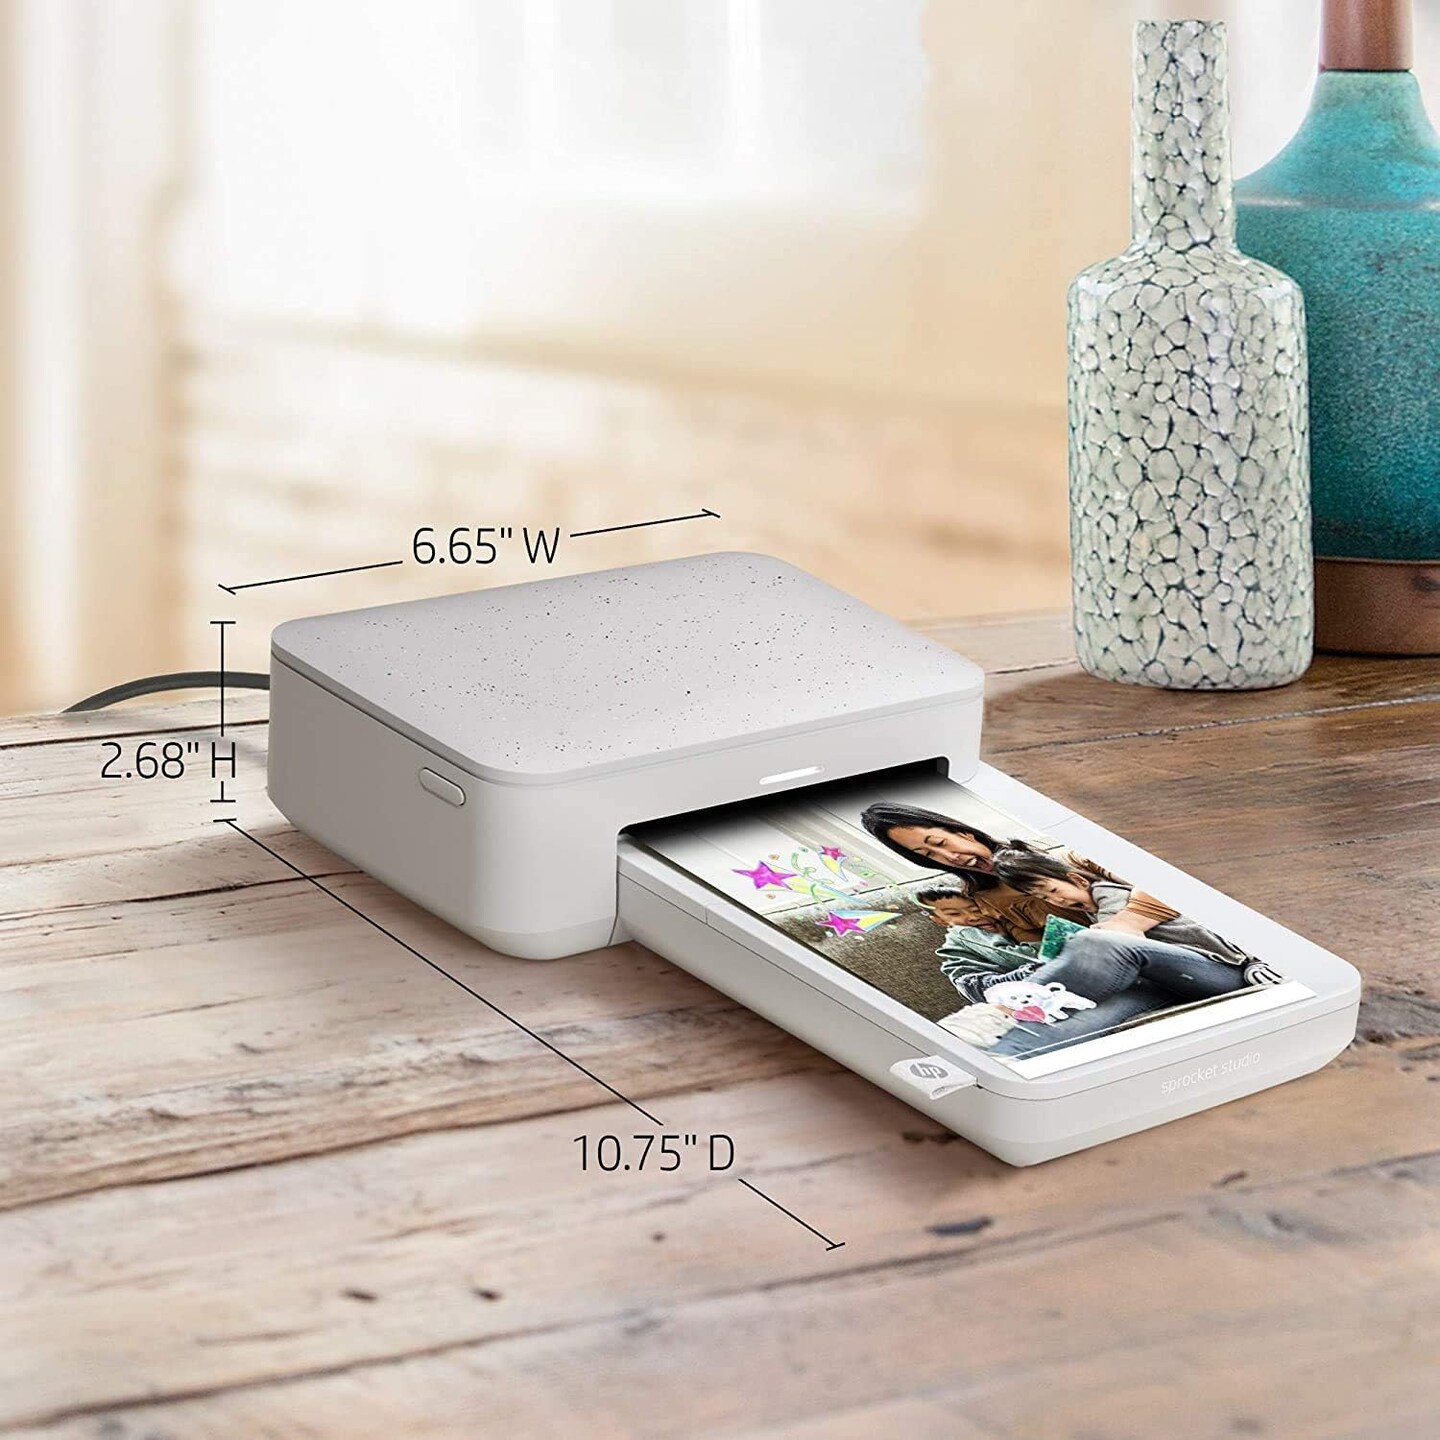 HP Sprocket Studio Portable Printer, 4x6&#x22; Instant Photo Printer for iOS &#x26; Android Devices